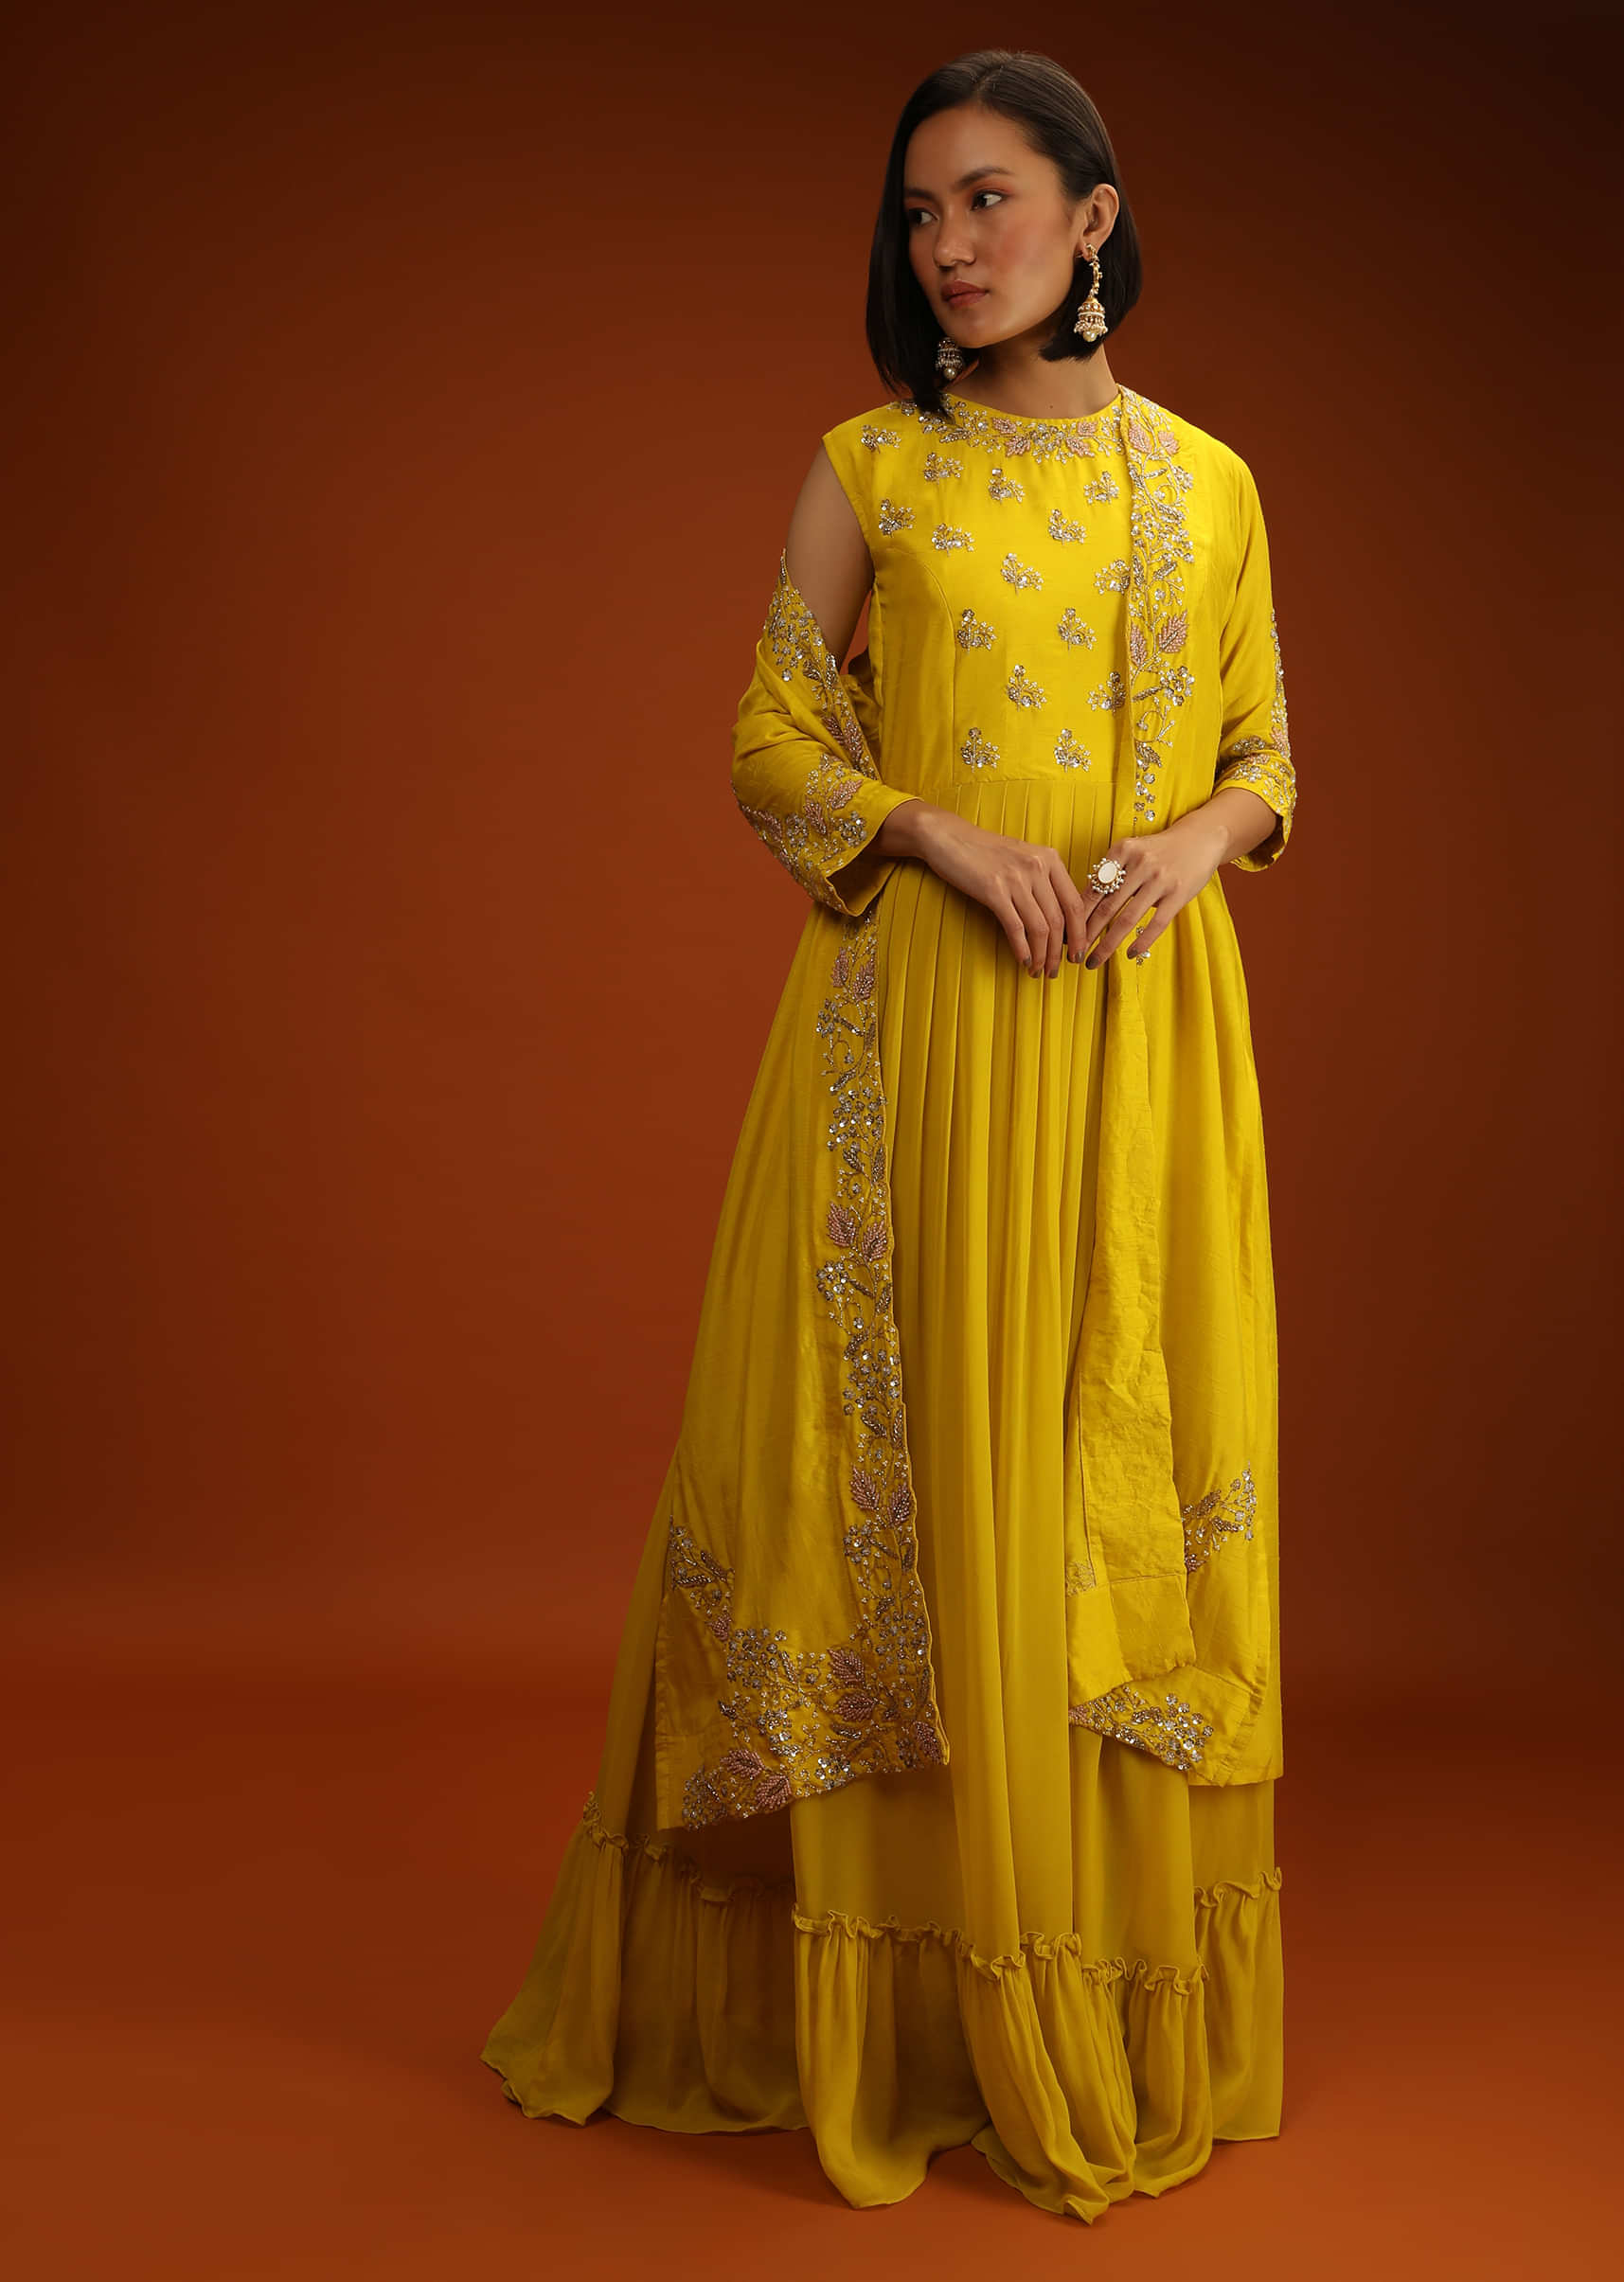 Lemon Yellow Indowestern Dress And Full Sleeves Jacket Set With Hand Embroidered Floral Motifs